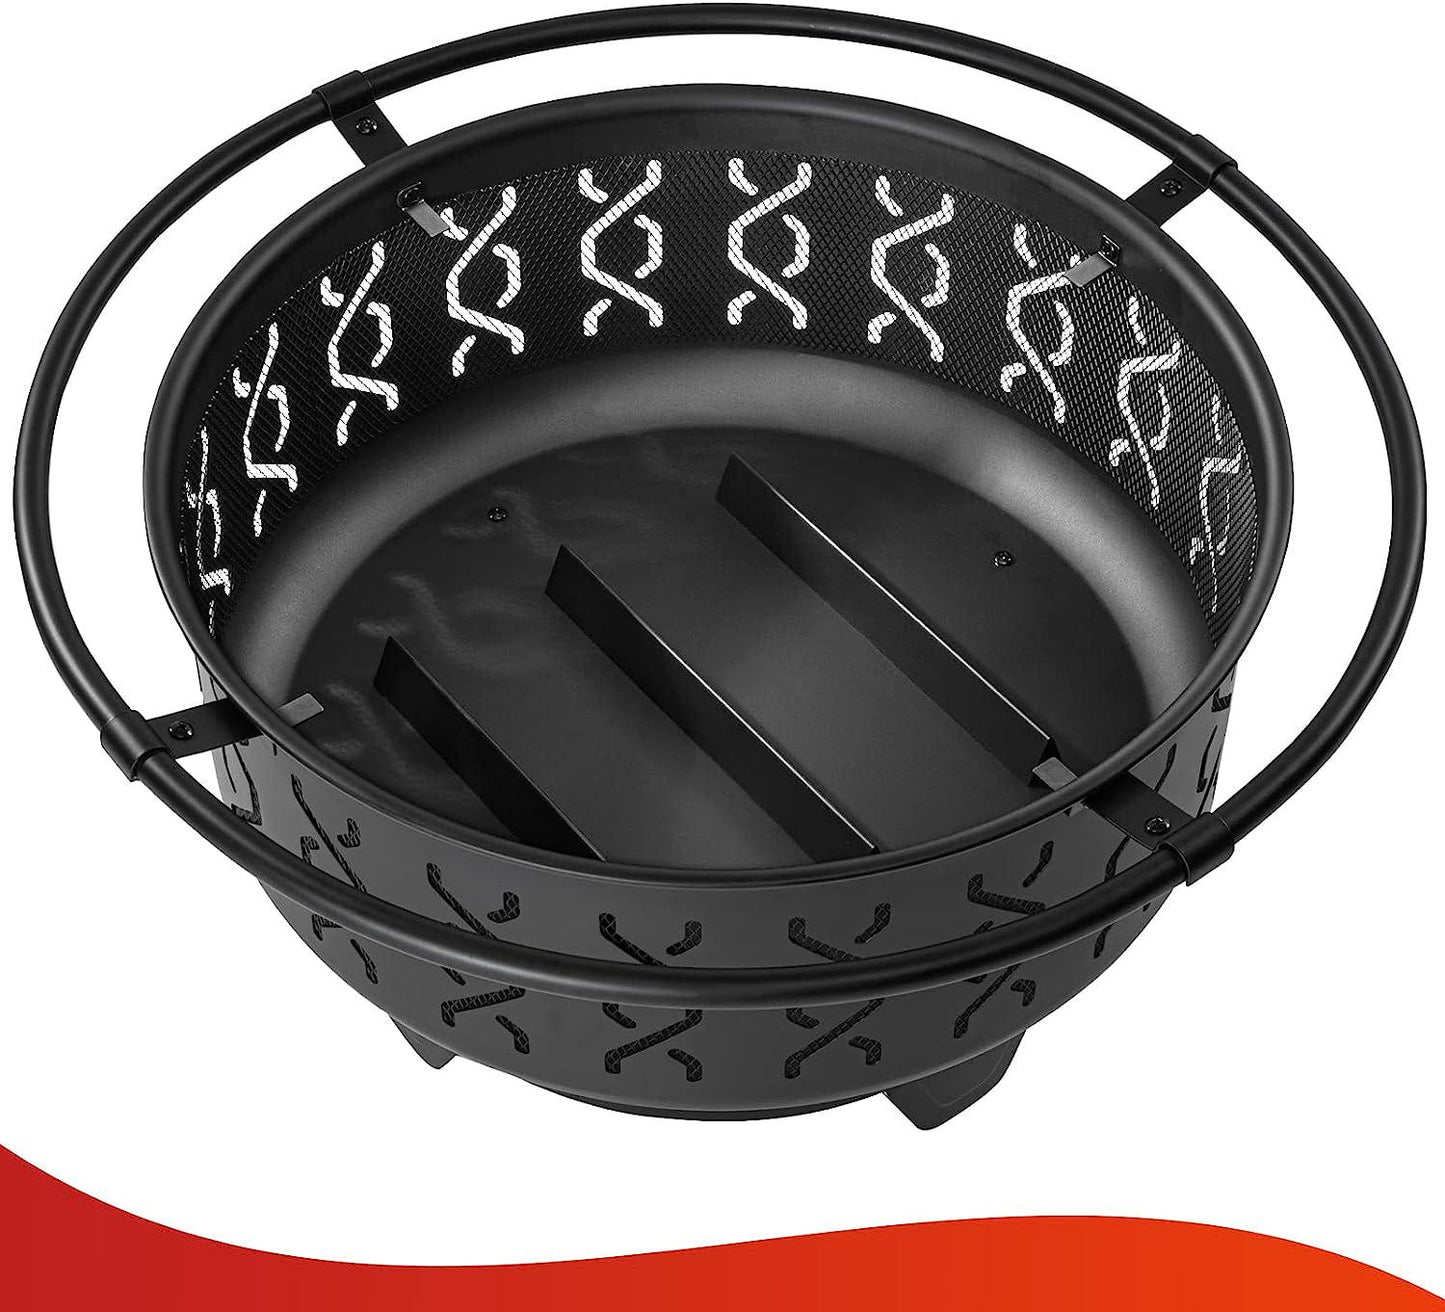 30 Inch Fire Pits for Outside Wood Burning Outdoor Large FirePit Round Steel Firepit for Patio Backyard Garden Outdoor Heating,with Spark Screen,Log Grate,Poker, Black (SFPR-001)